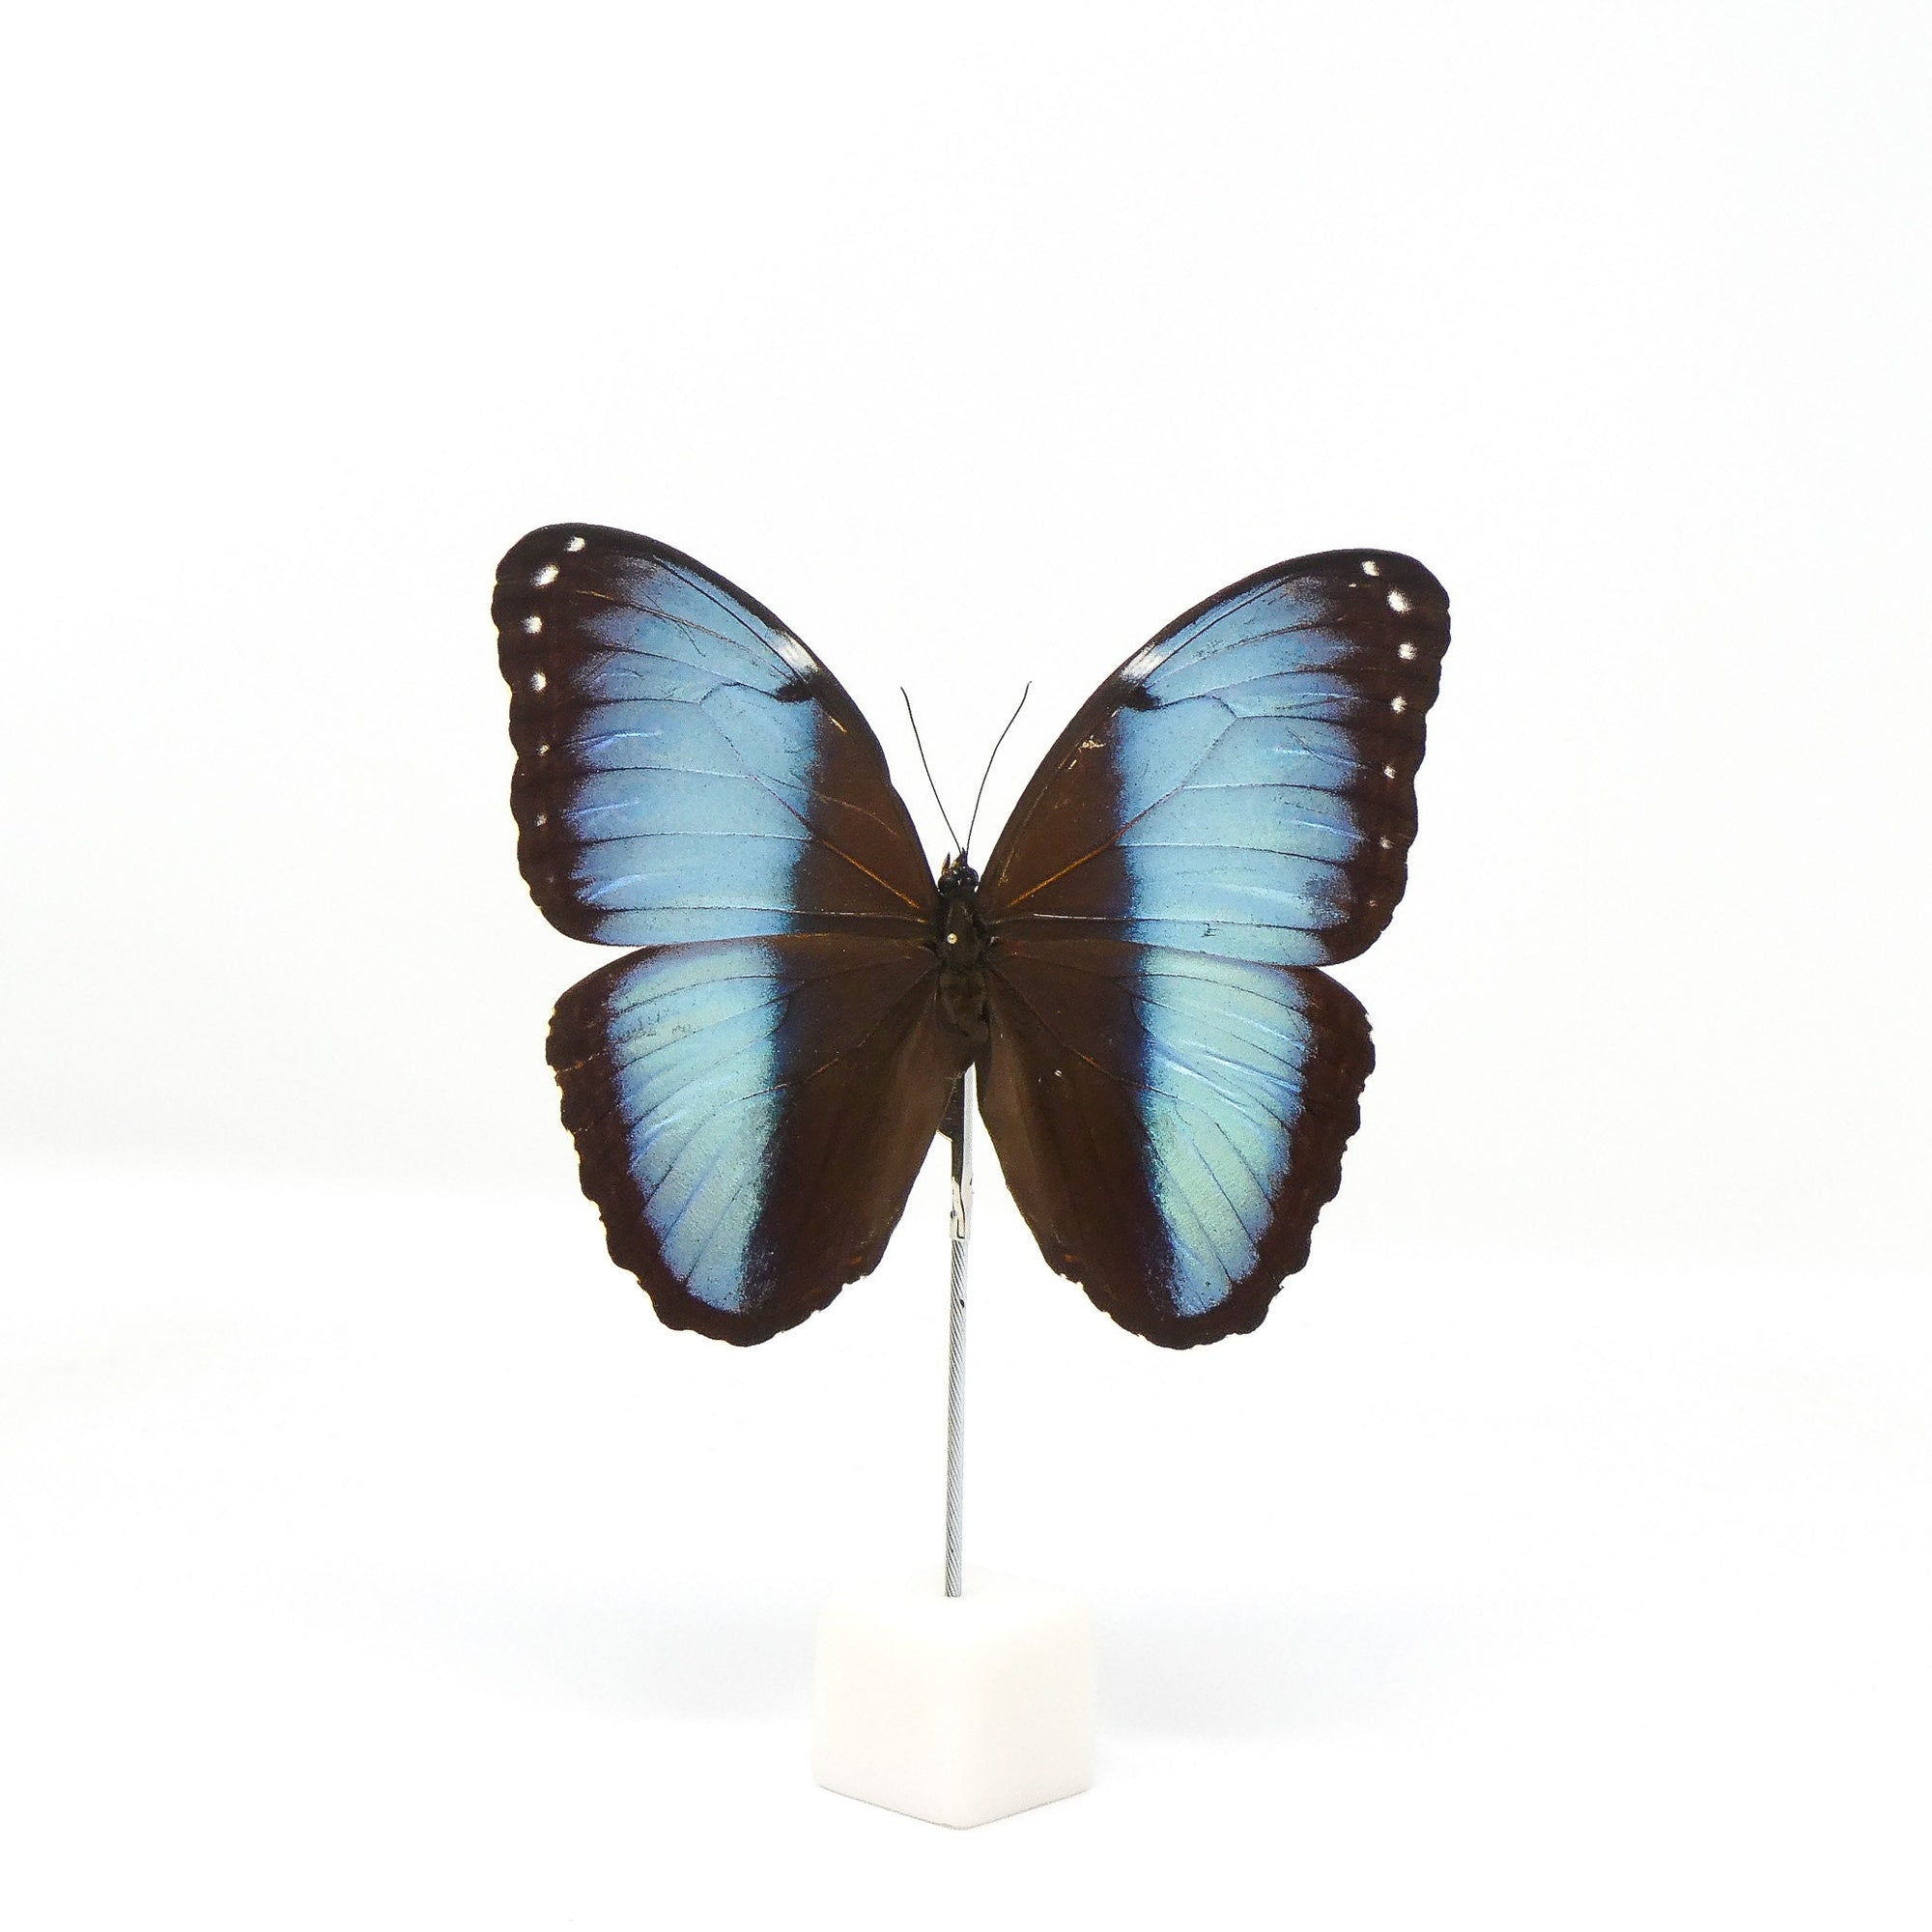 SPREAD WINGS-OPEN Morpho deidamia, Dry-Preserved Mounted Specimen A1/A1-